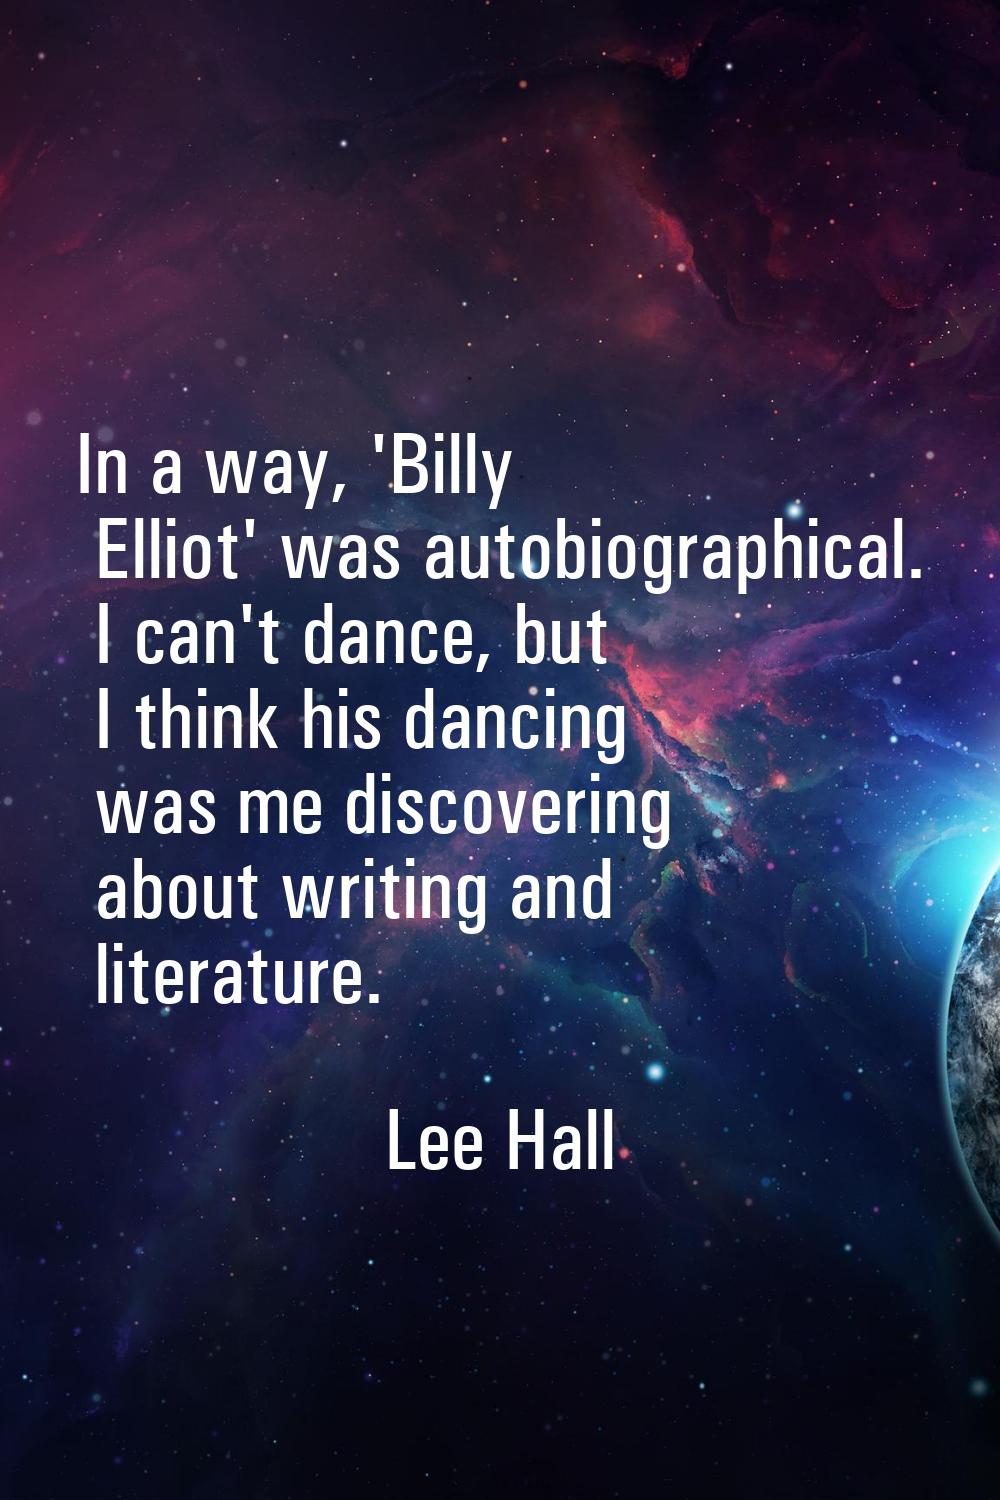 In a way, 'Billy Elliot' was autobiographical. I can't dance, but I think his dancing was me discov